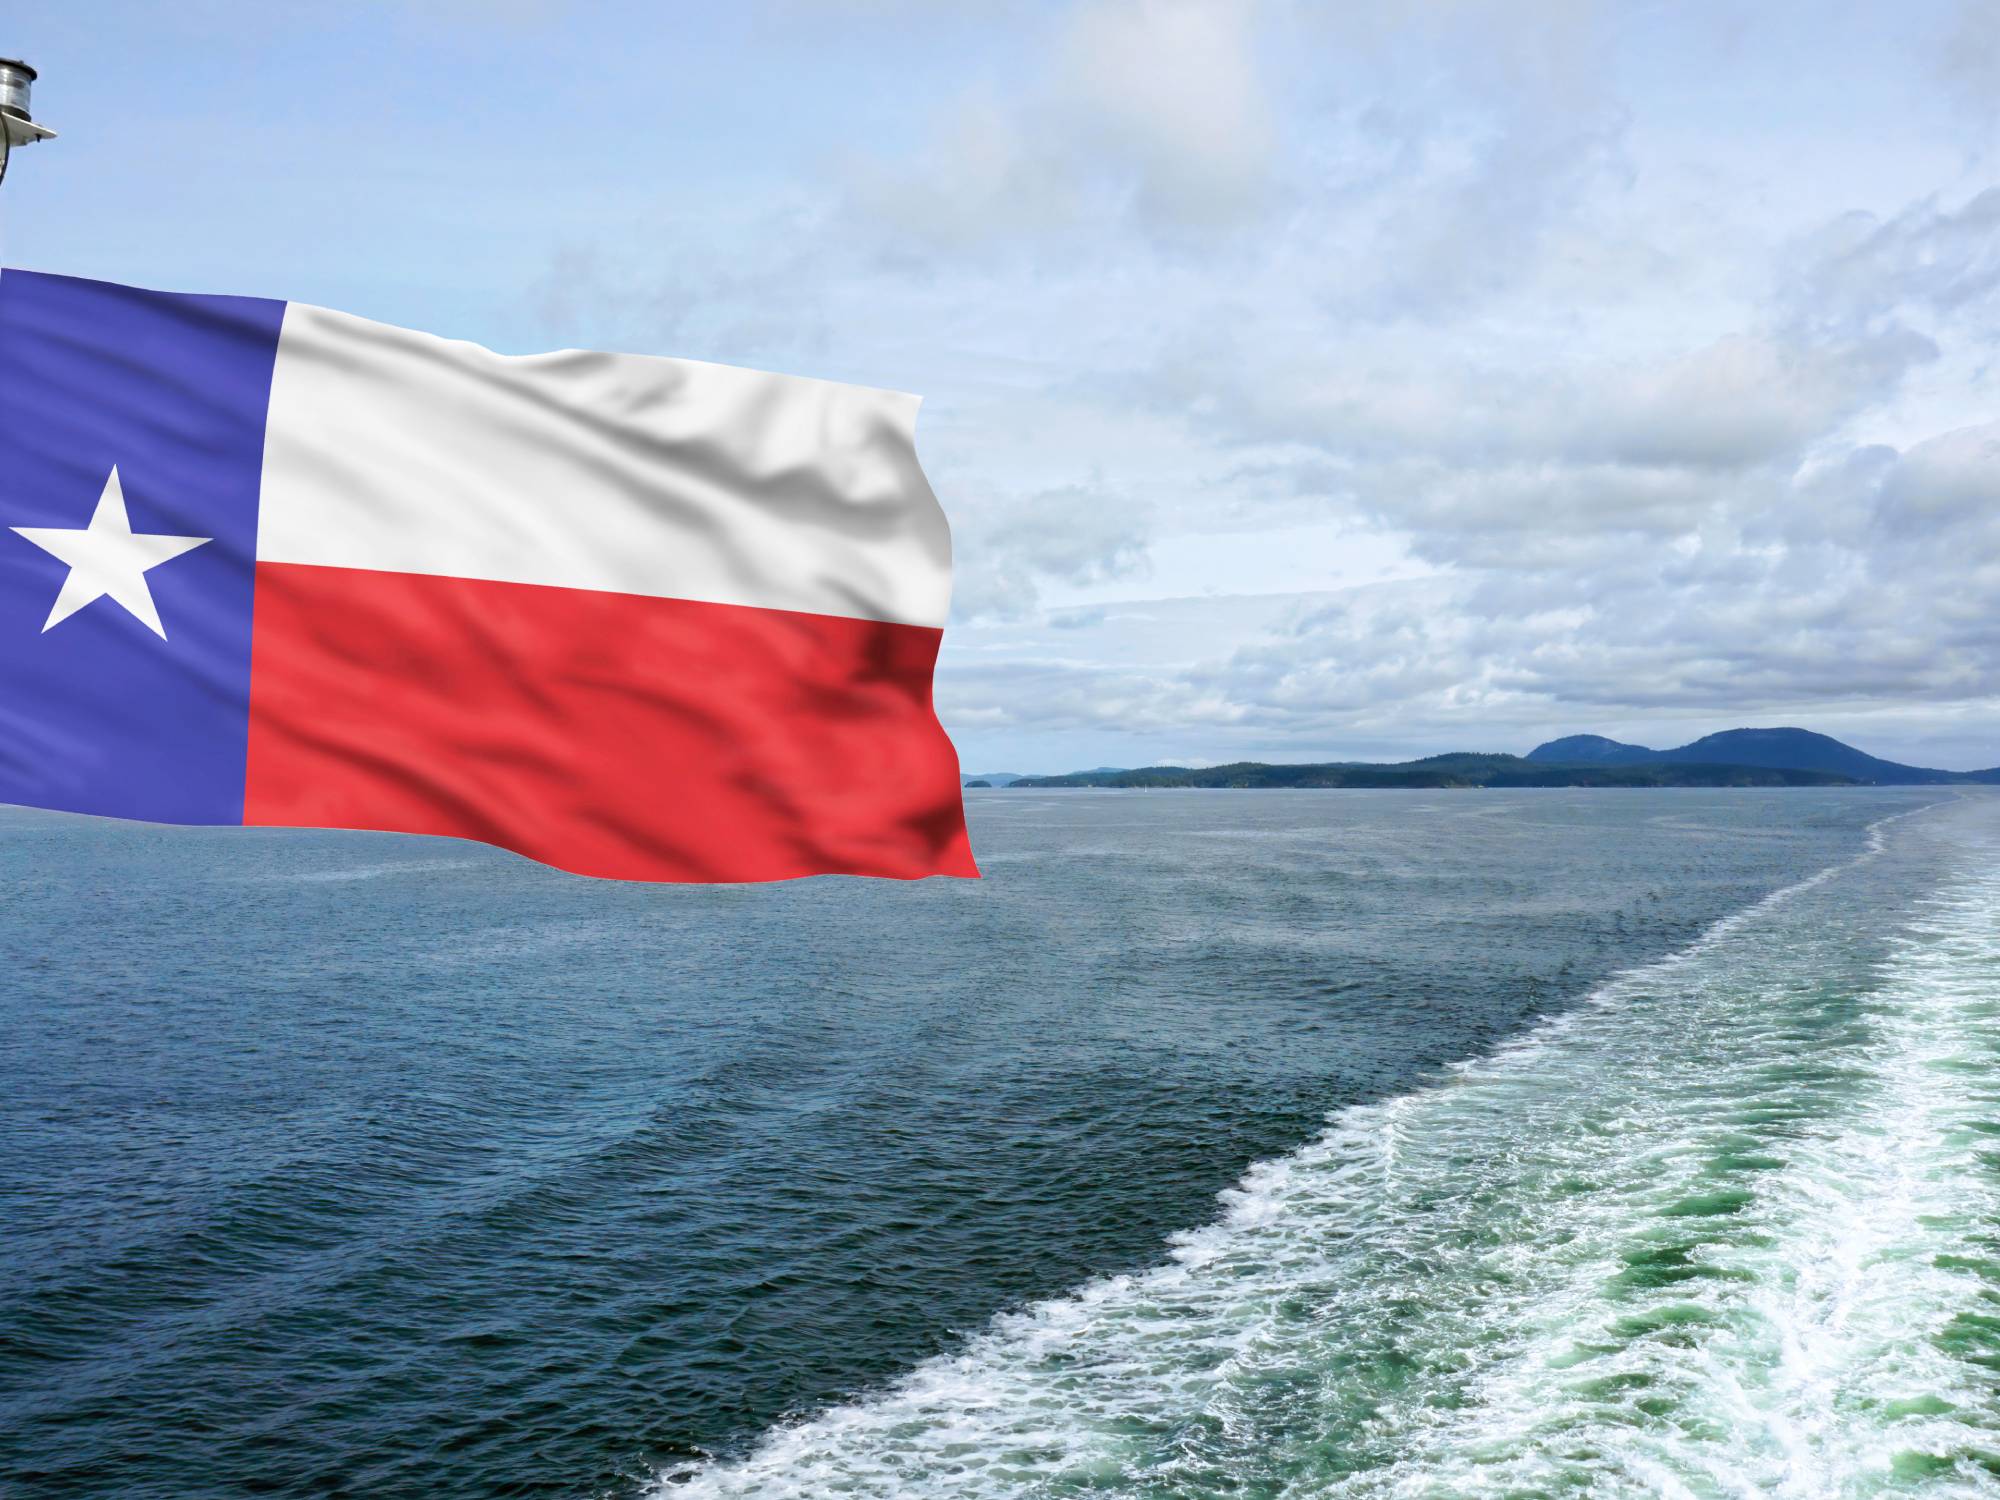 A Texas state flag is attached to the back of a boat that's going across a massive lake during the day.